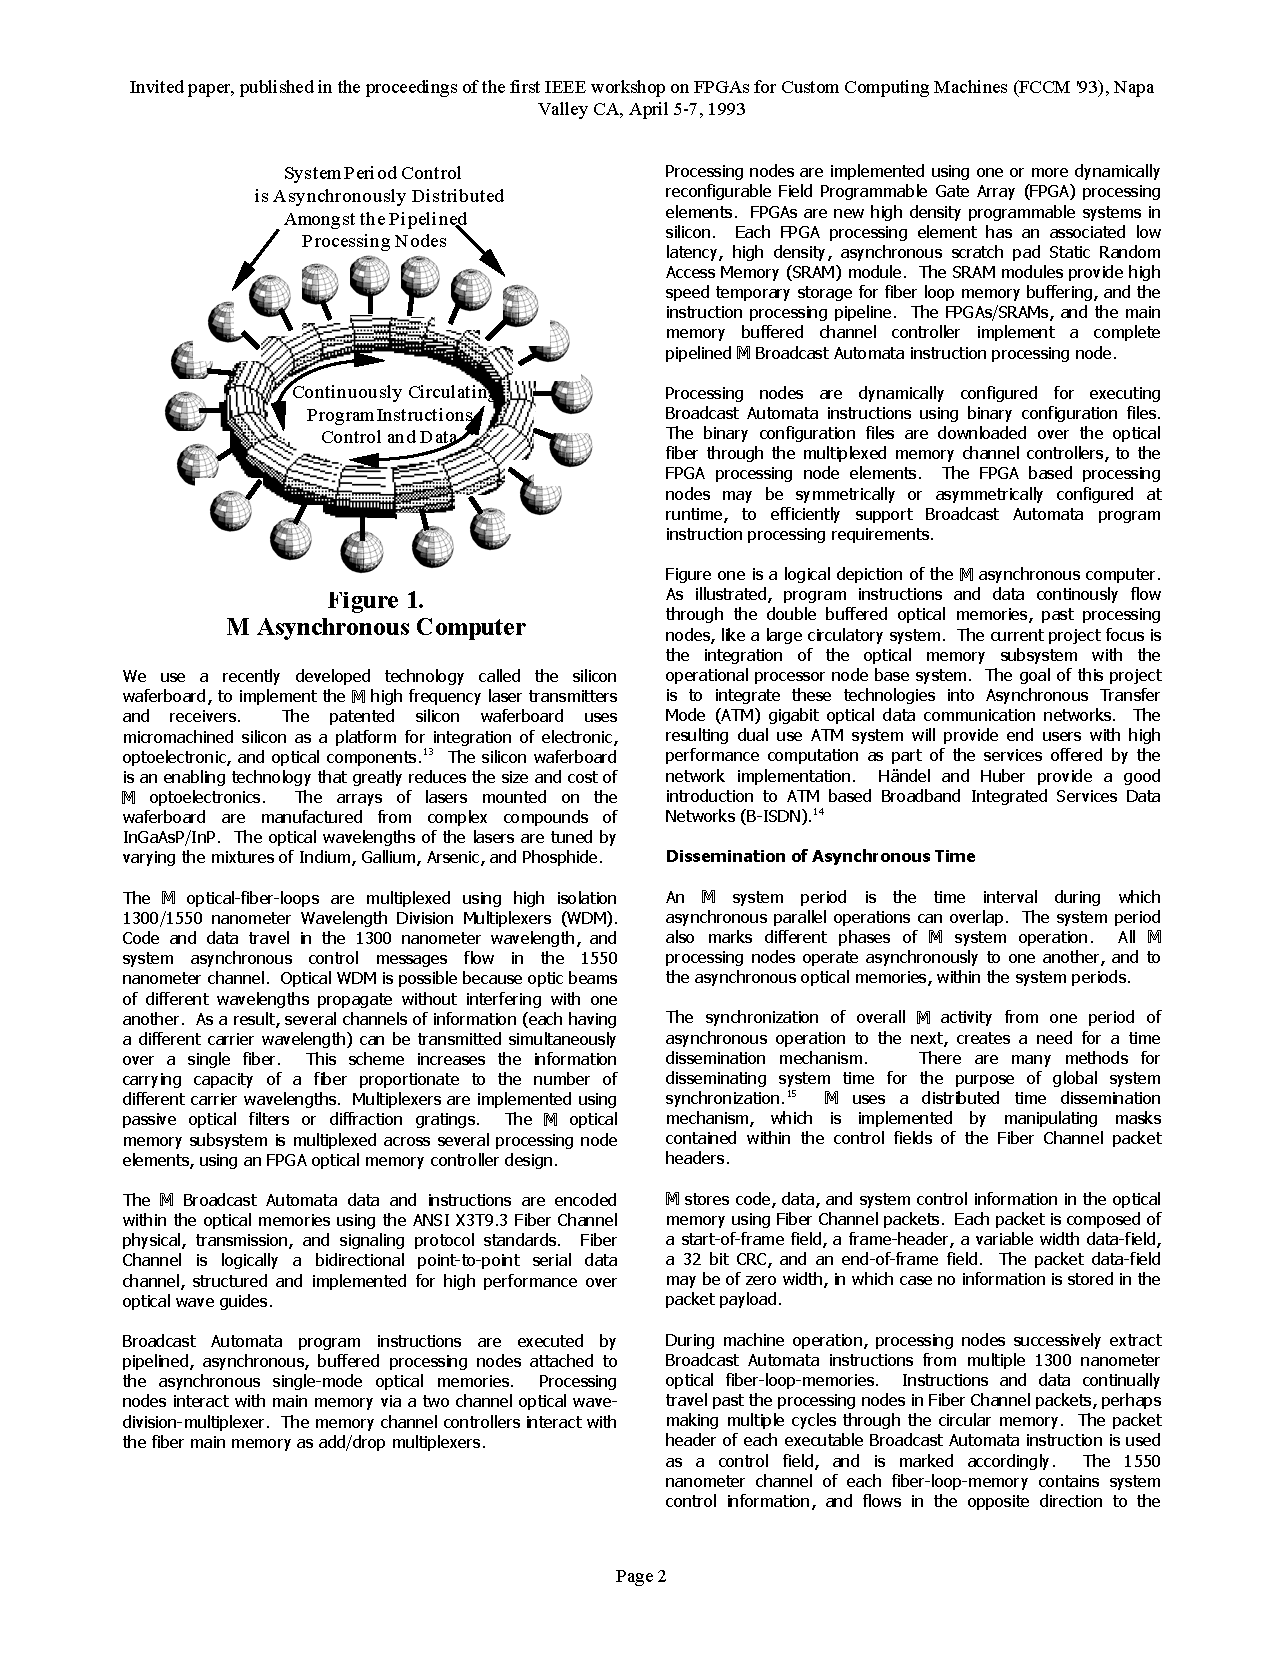 IEEE_FCCMLfw_Page_2.png